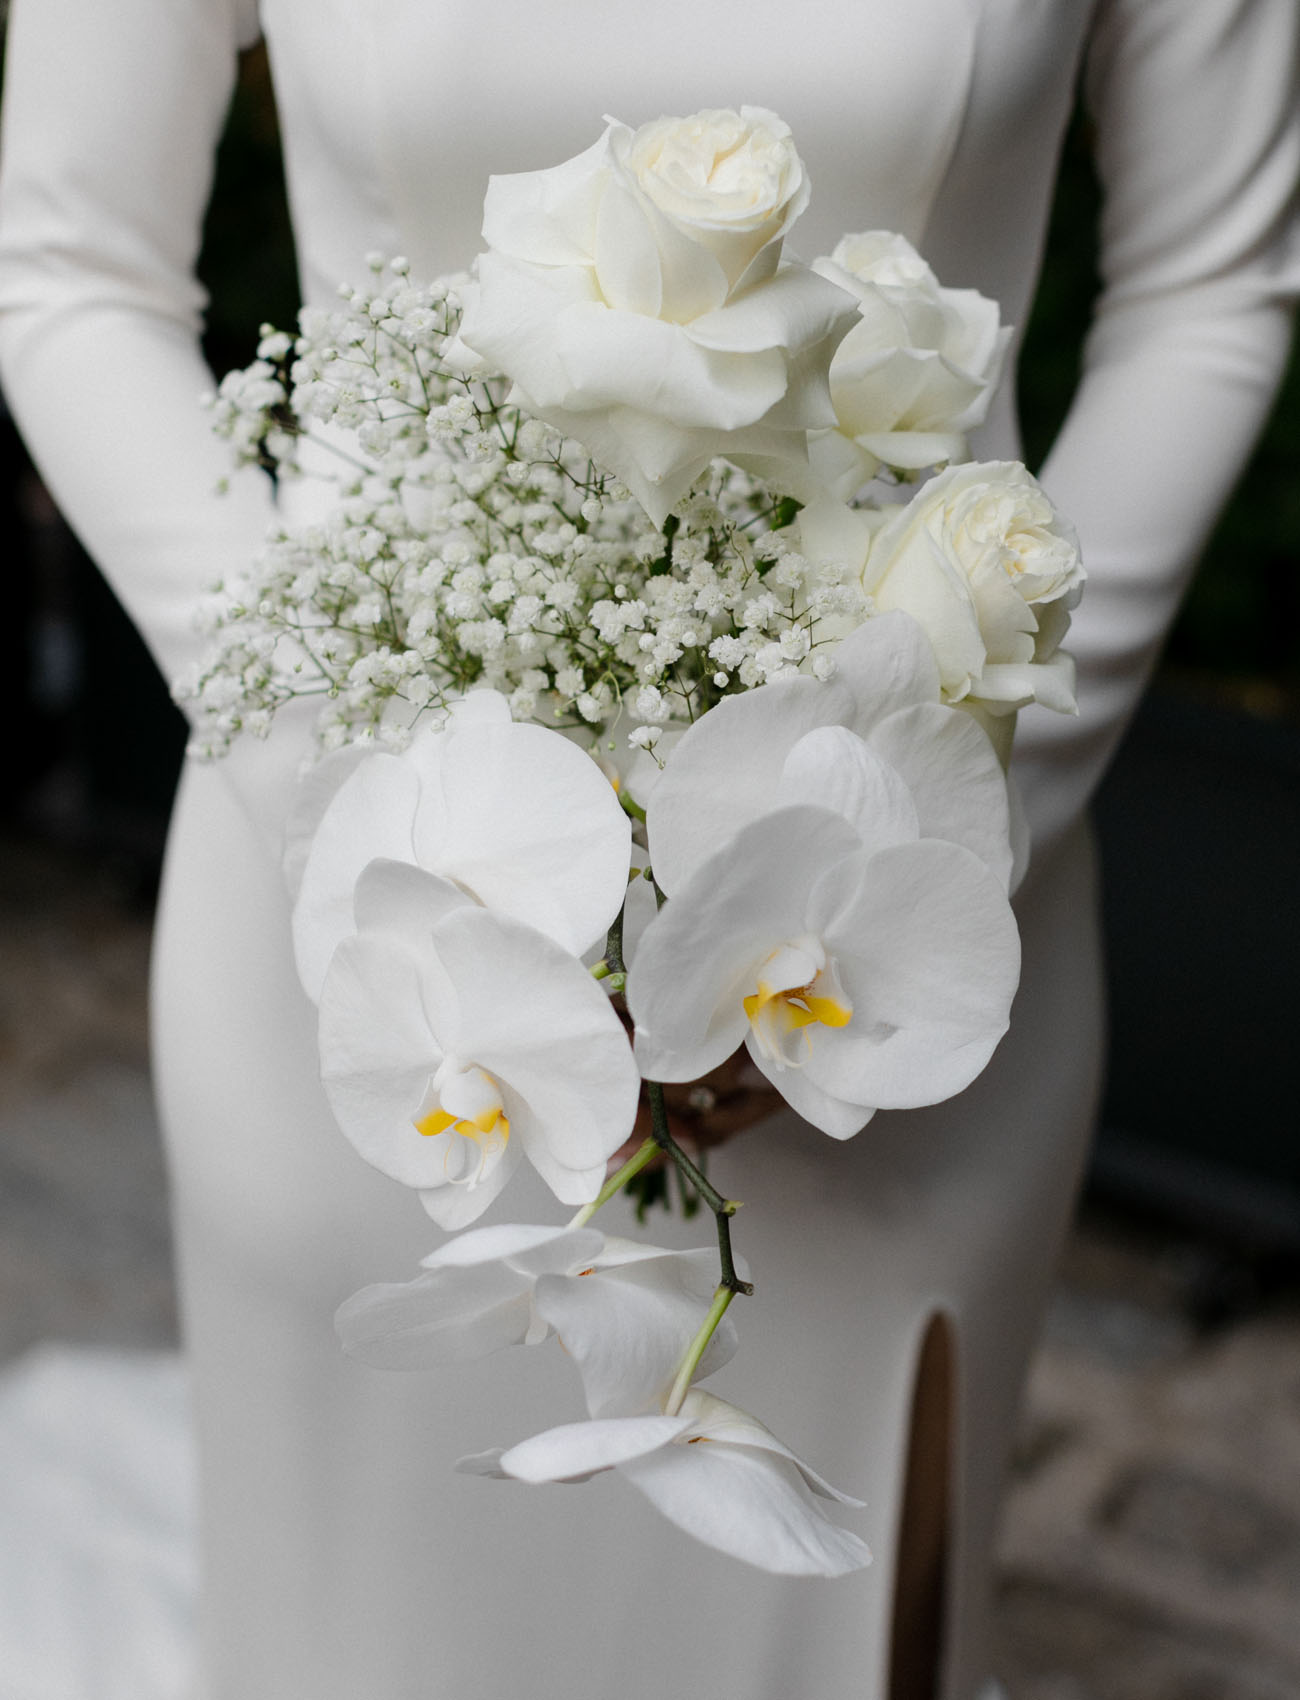 The wedding bouquet was done with white roses, orchids and baby's breath